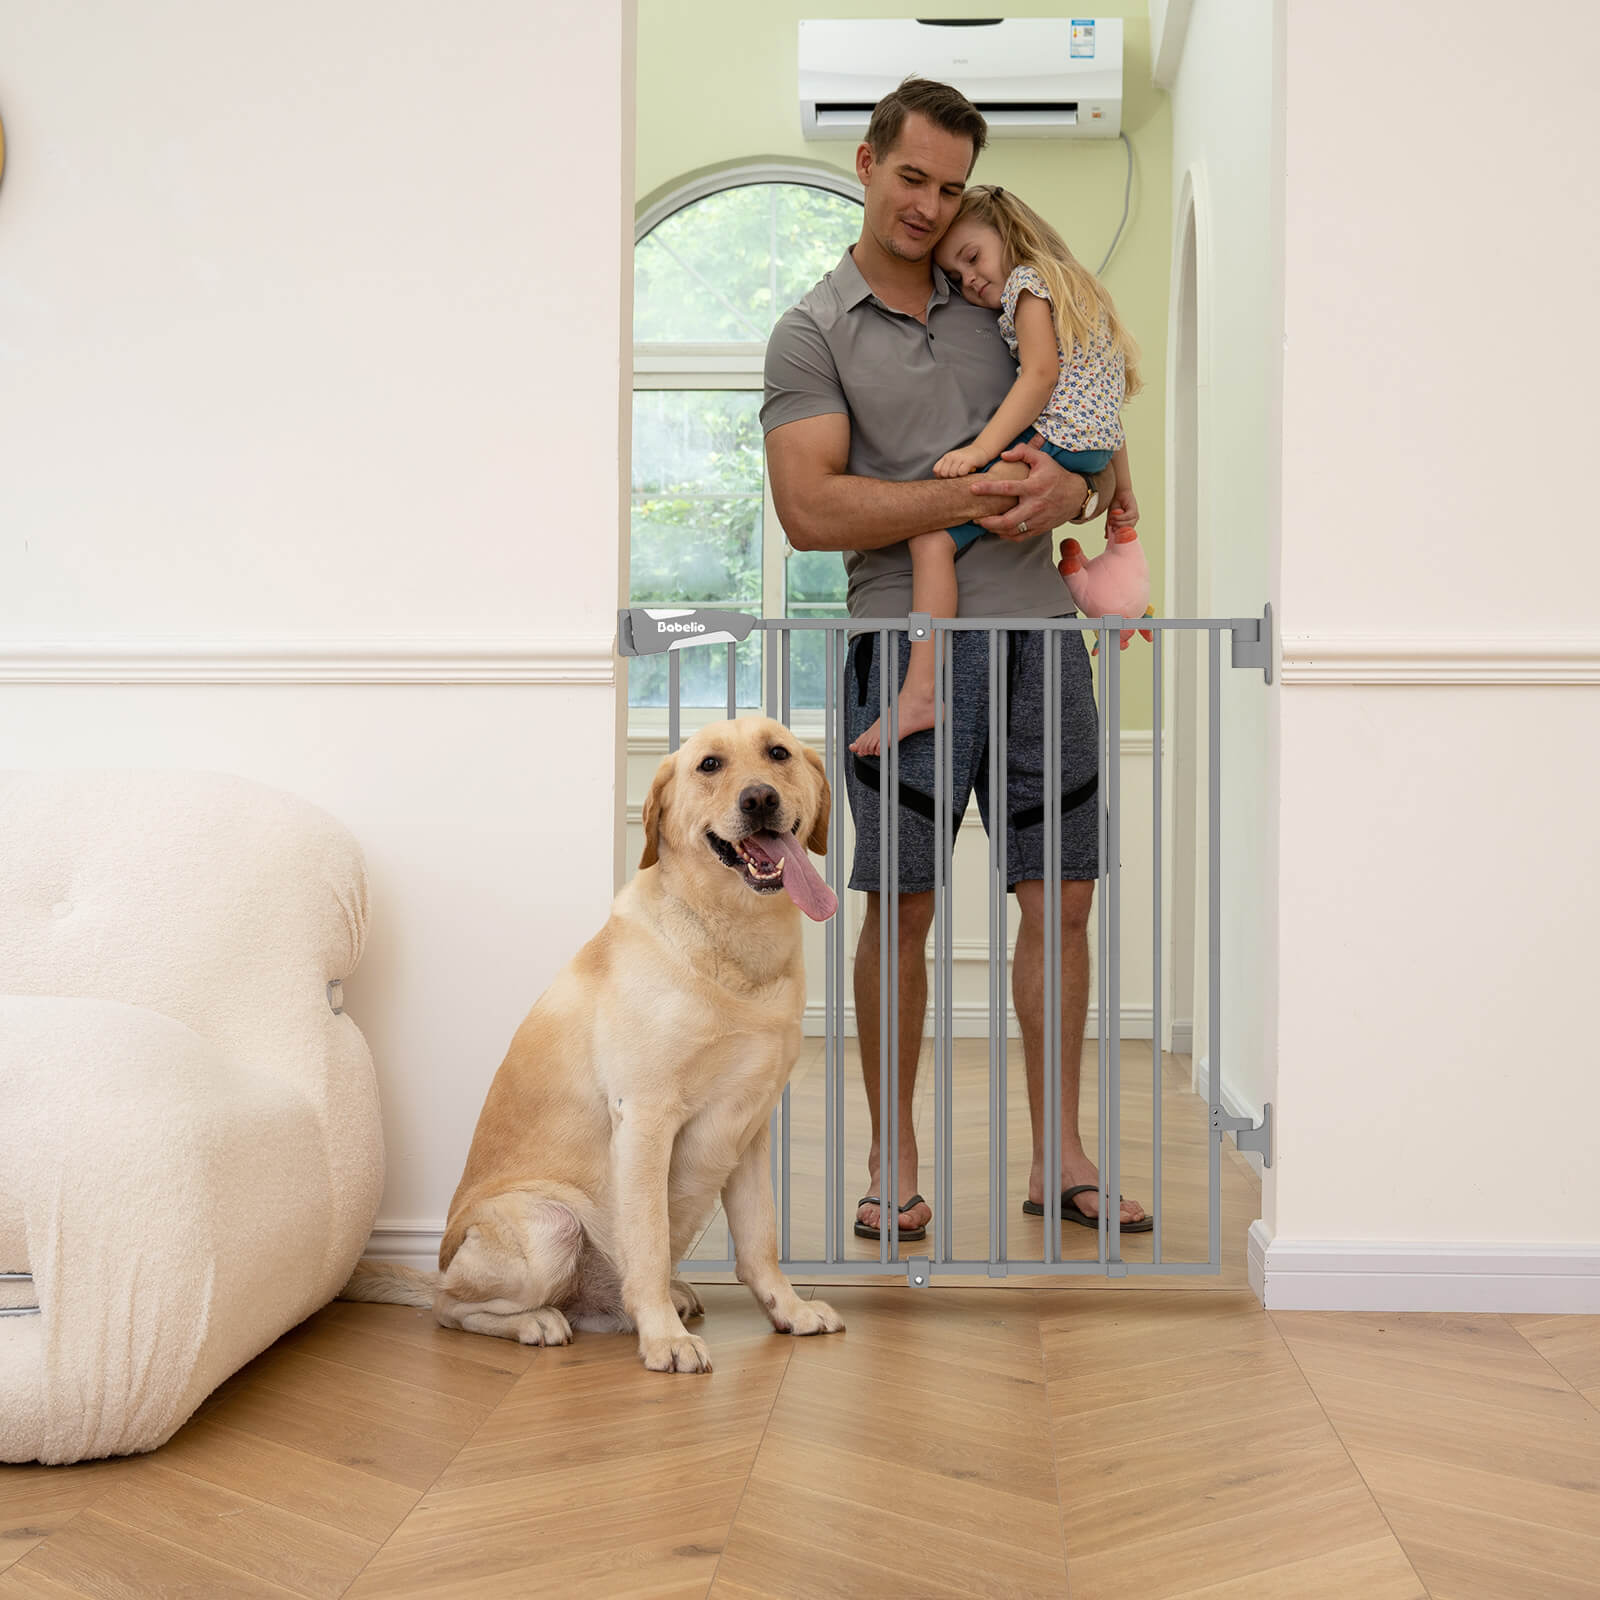 Babelio 34" Extra Tall Auto Close Baby/Dog Gate - No Threshold, 26-43" Wide, for Doorways, Stairs